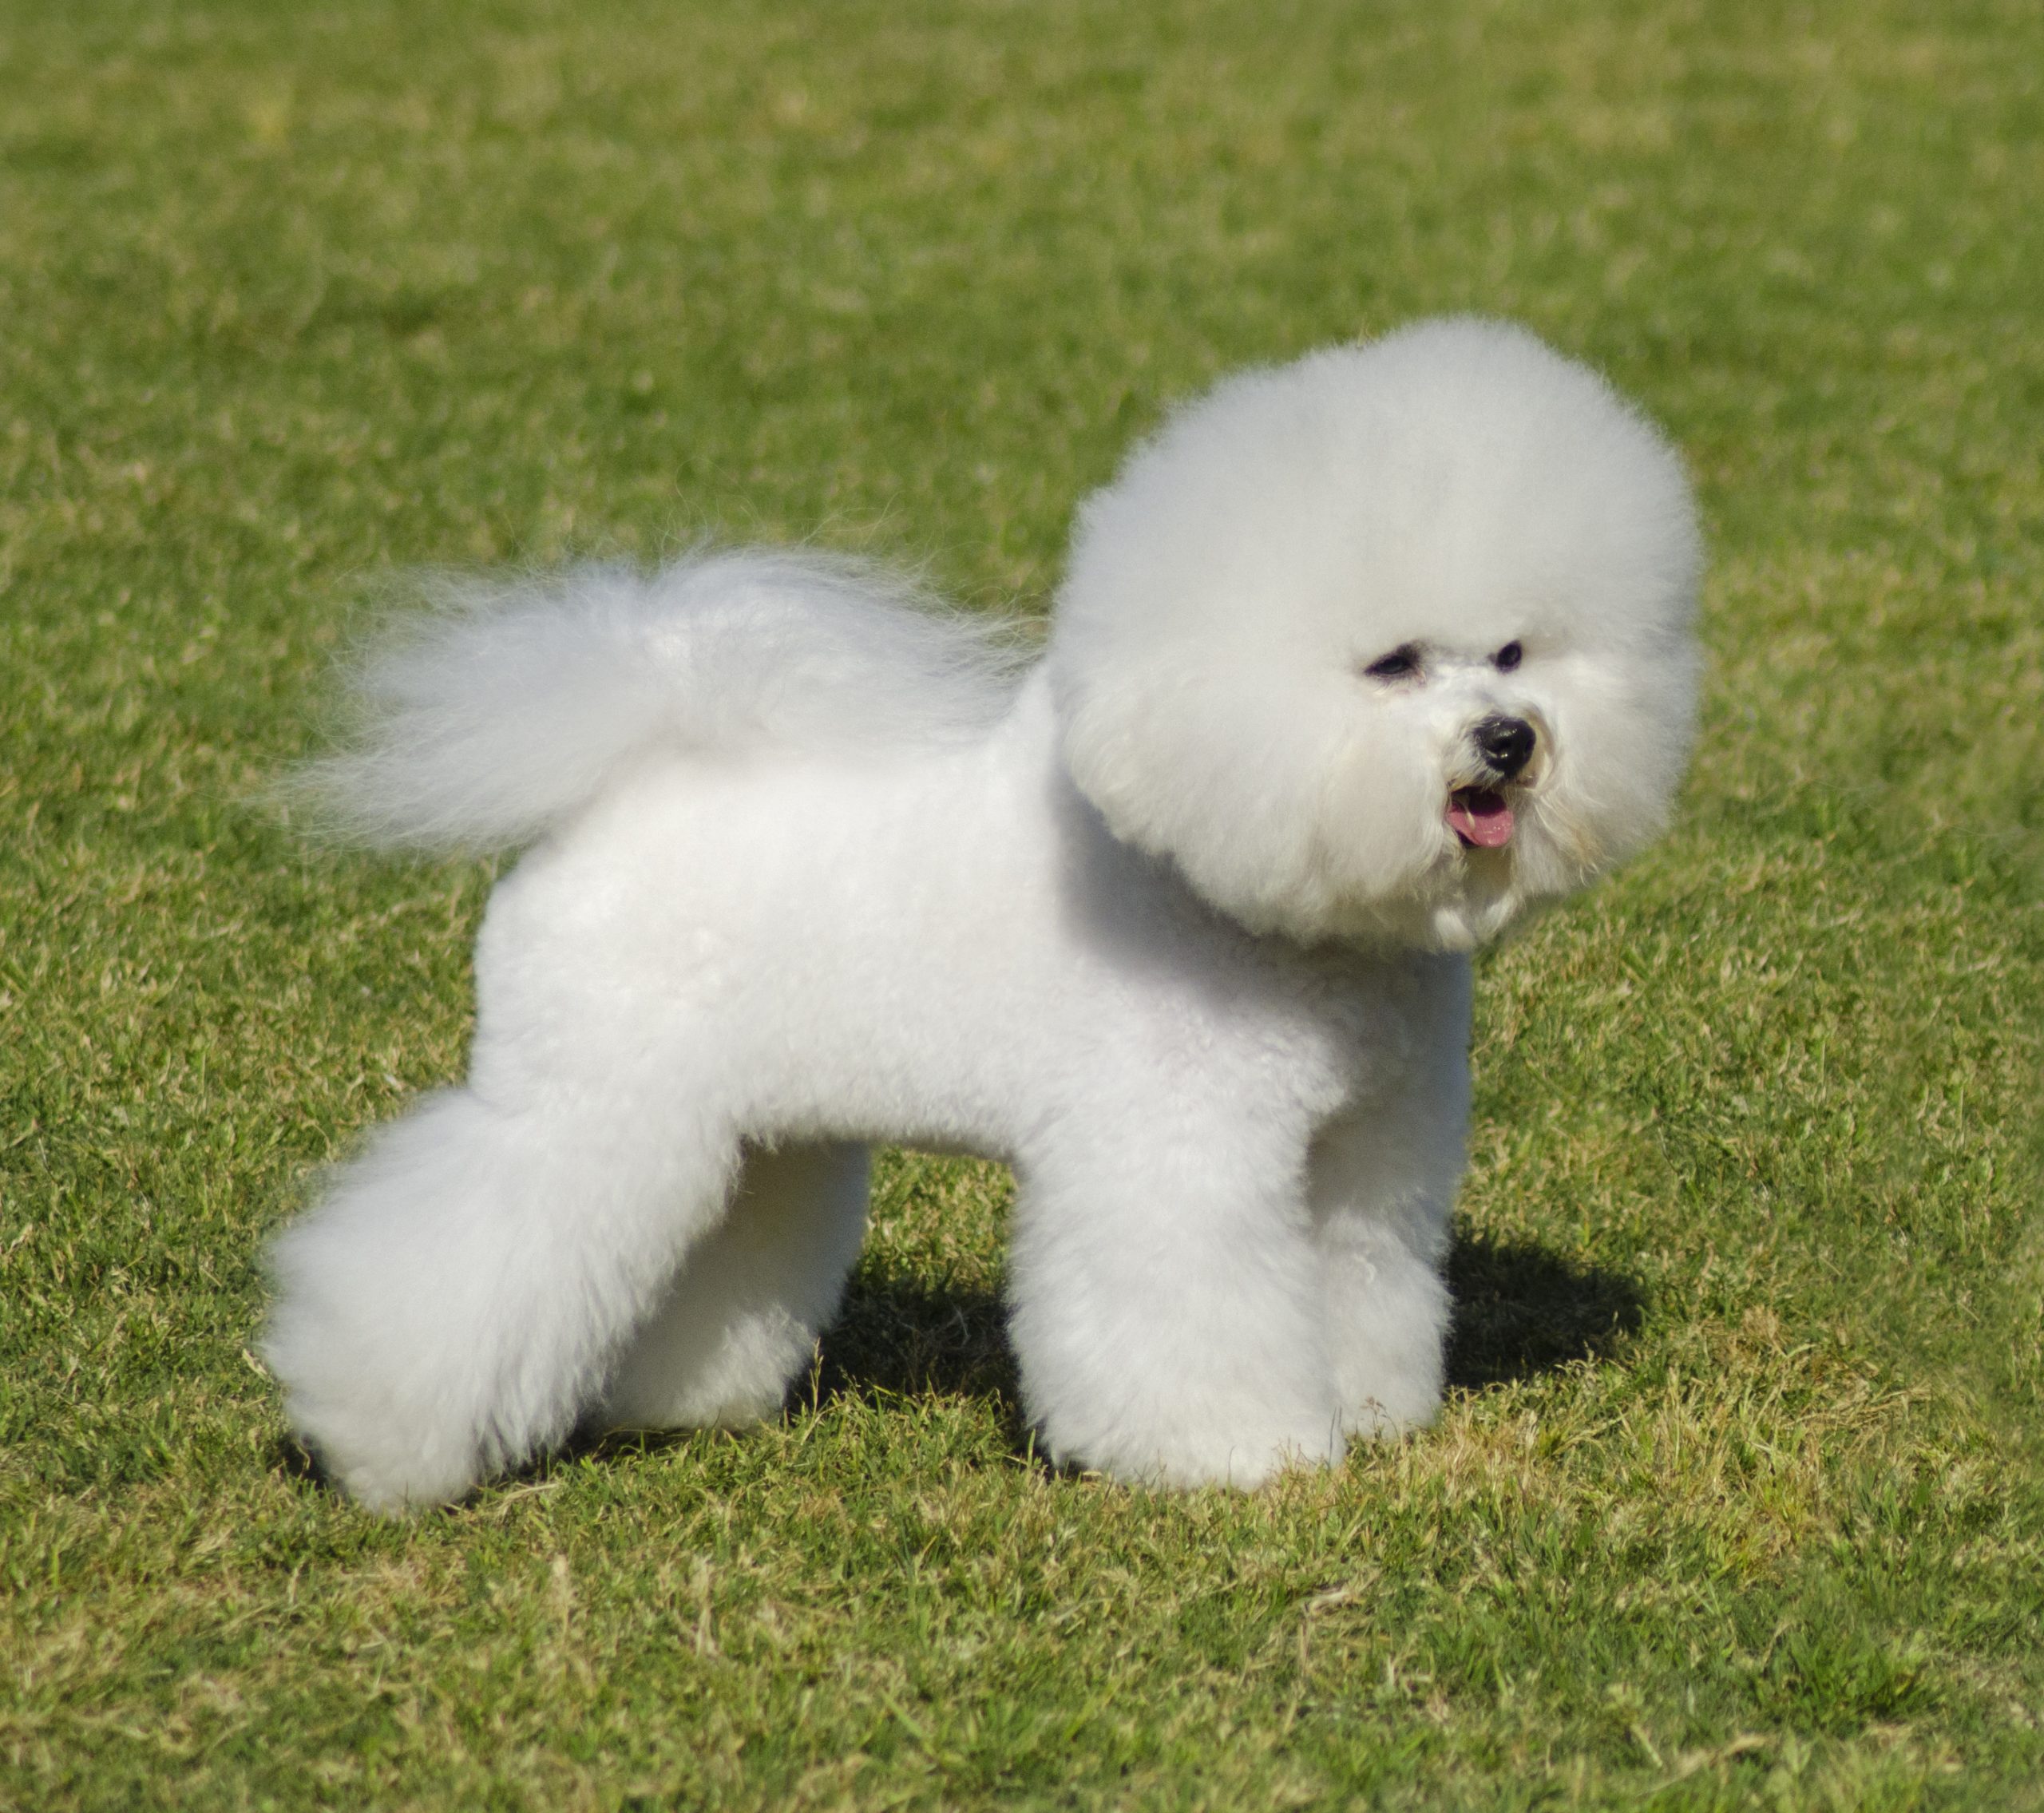 A,Small,Beautiful,And,Adorable,Bichon,Frise,Dog,Standing,On